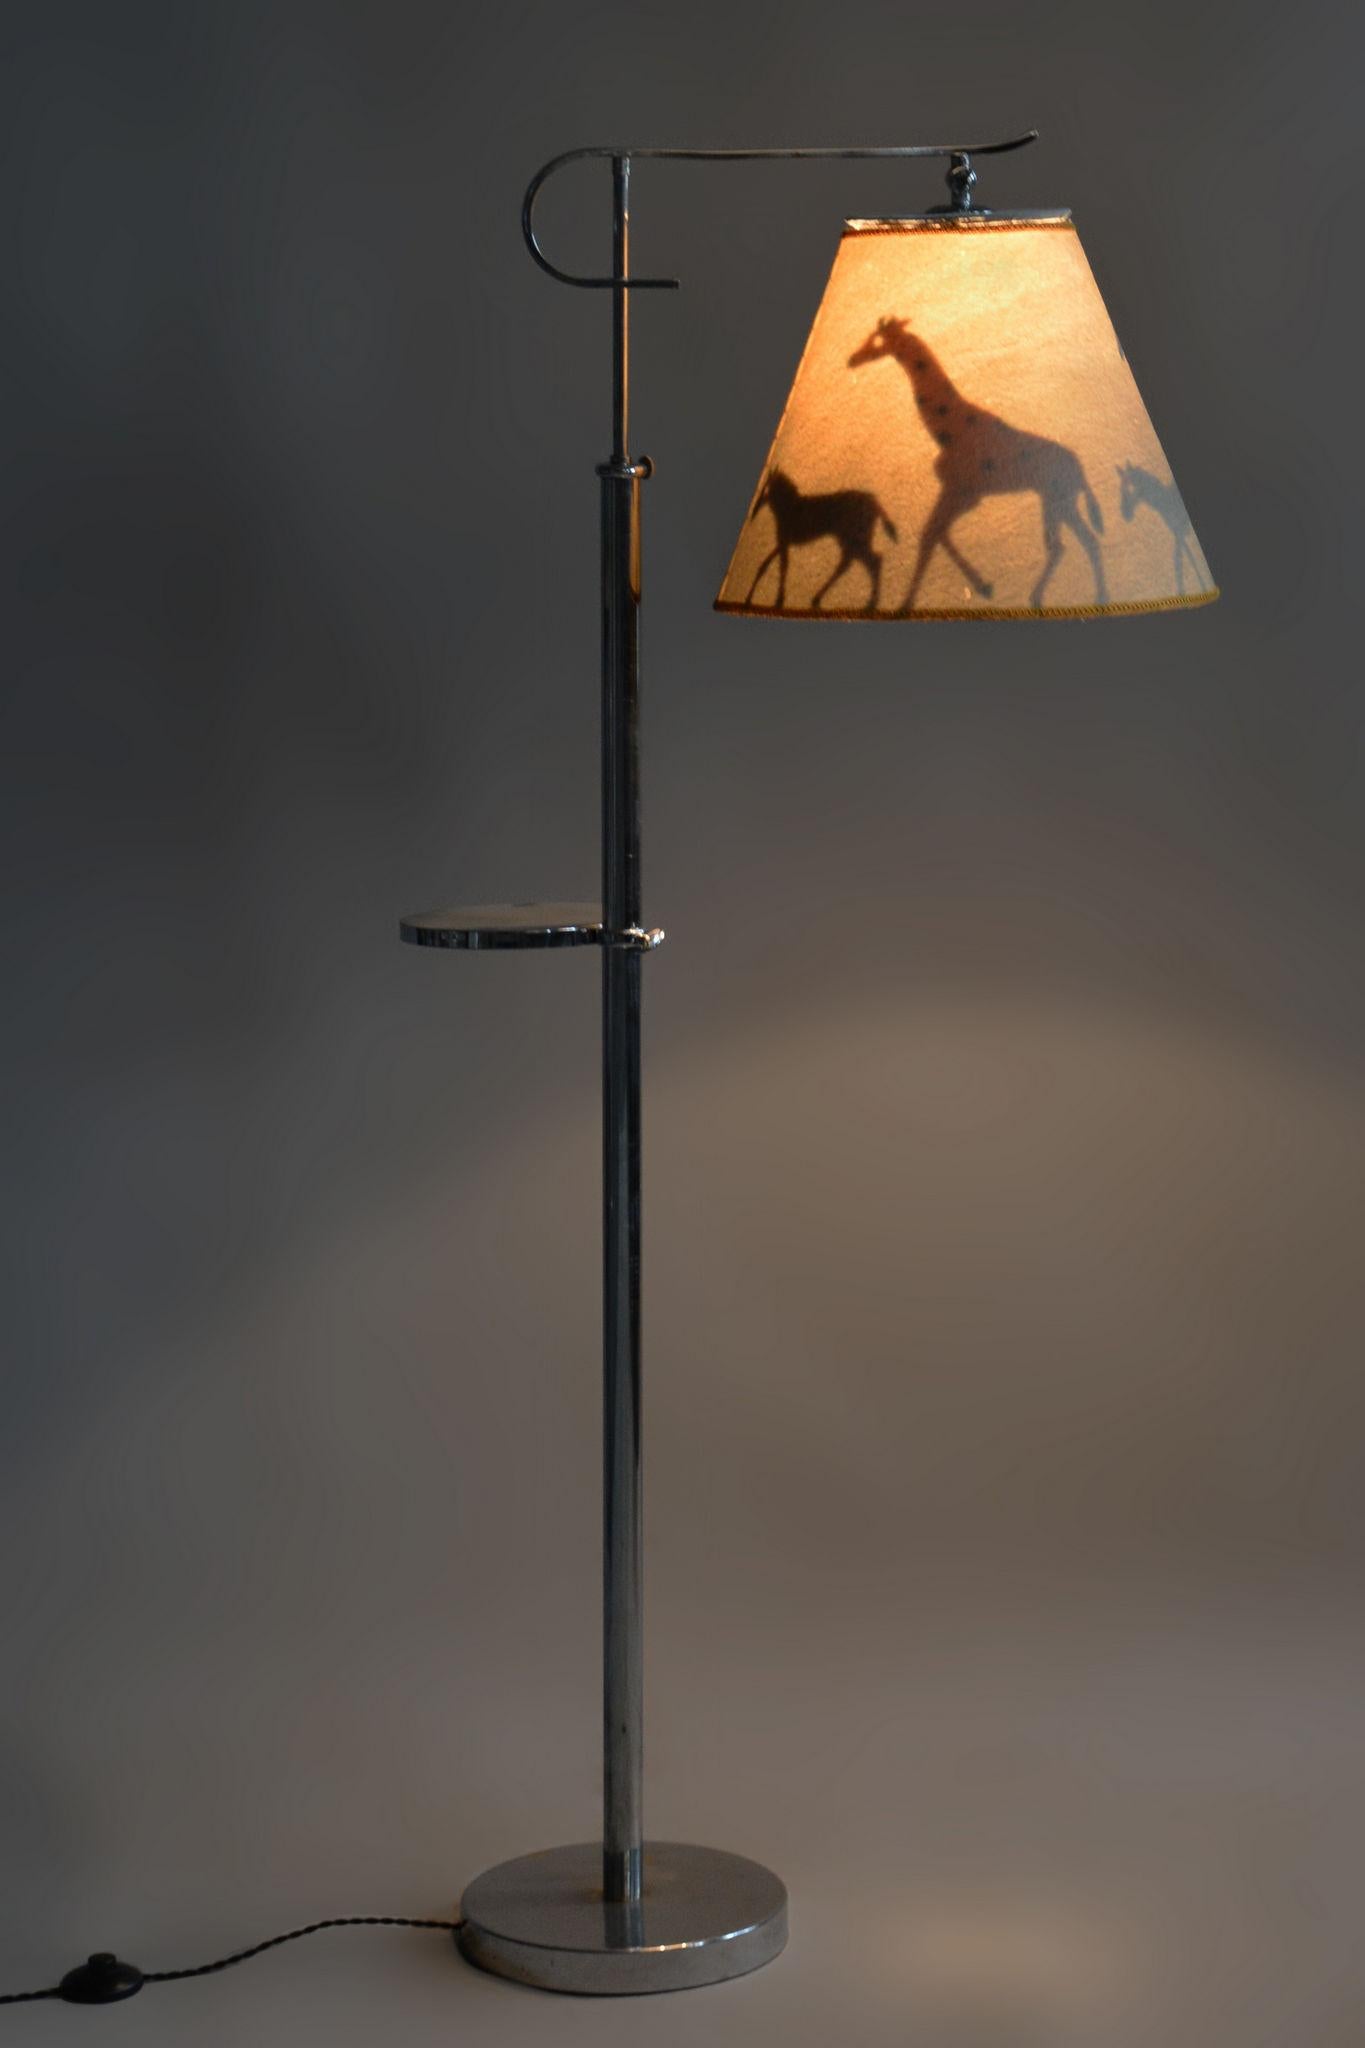 Early 20th Century Restored Art Deco Floor Lamp, Chrome, New Electrification, Czechia, 1920s For Sale